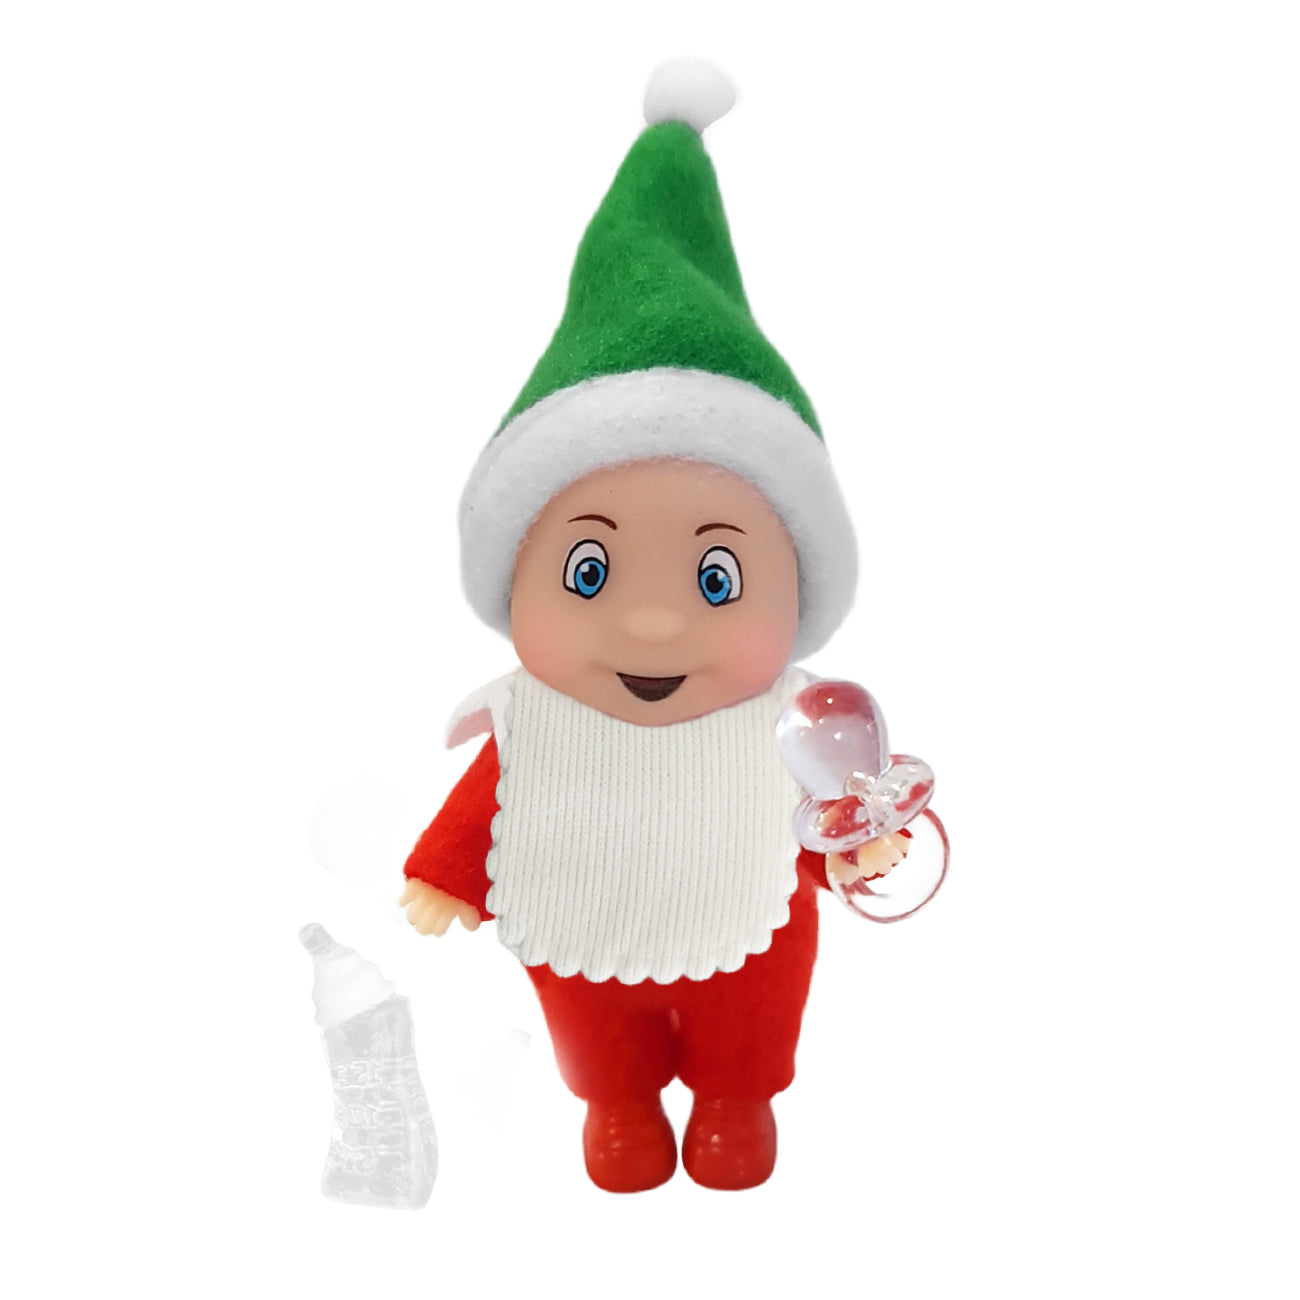 Elf baby wearing a bib, holding a bottle and pacifier